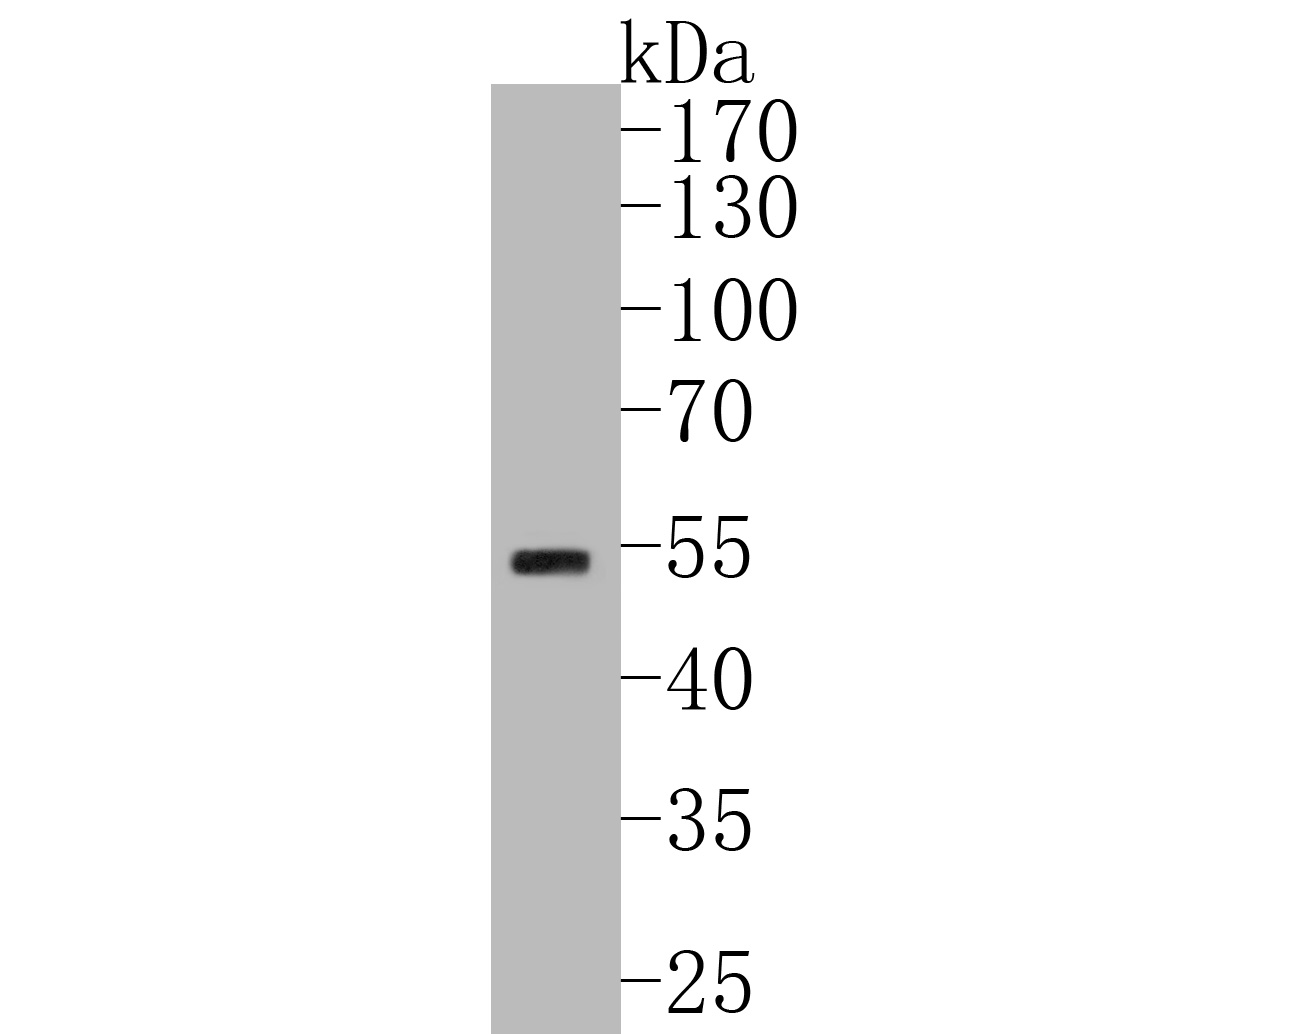 Western blot analysis of HNF-4-alpha on A549 cell lysates. Proteins were transferred to a PVDF membrane and blocked with 5% BSA in PBS for 1 hour at room temperature. The primary antibody (ET1611-43, 1/500) was used in 5% BSA at room temperature for 2 hours. Goat Anti-Rabbit IgG - HRP Secondary Antibody (HA1001) at 1:5,000 dilution was used for 1 hour at room temperature.